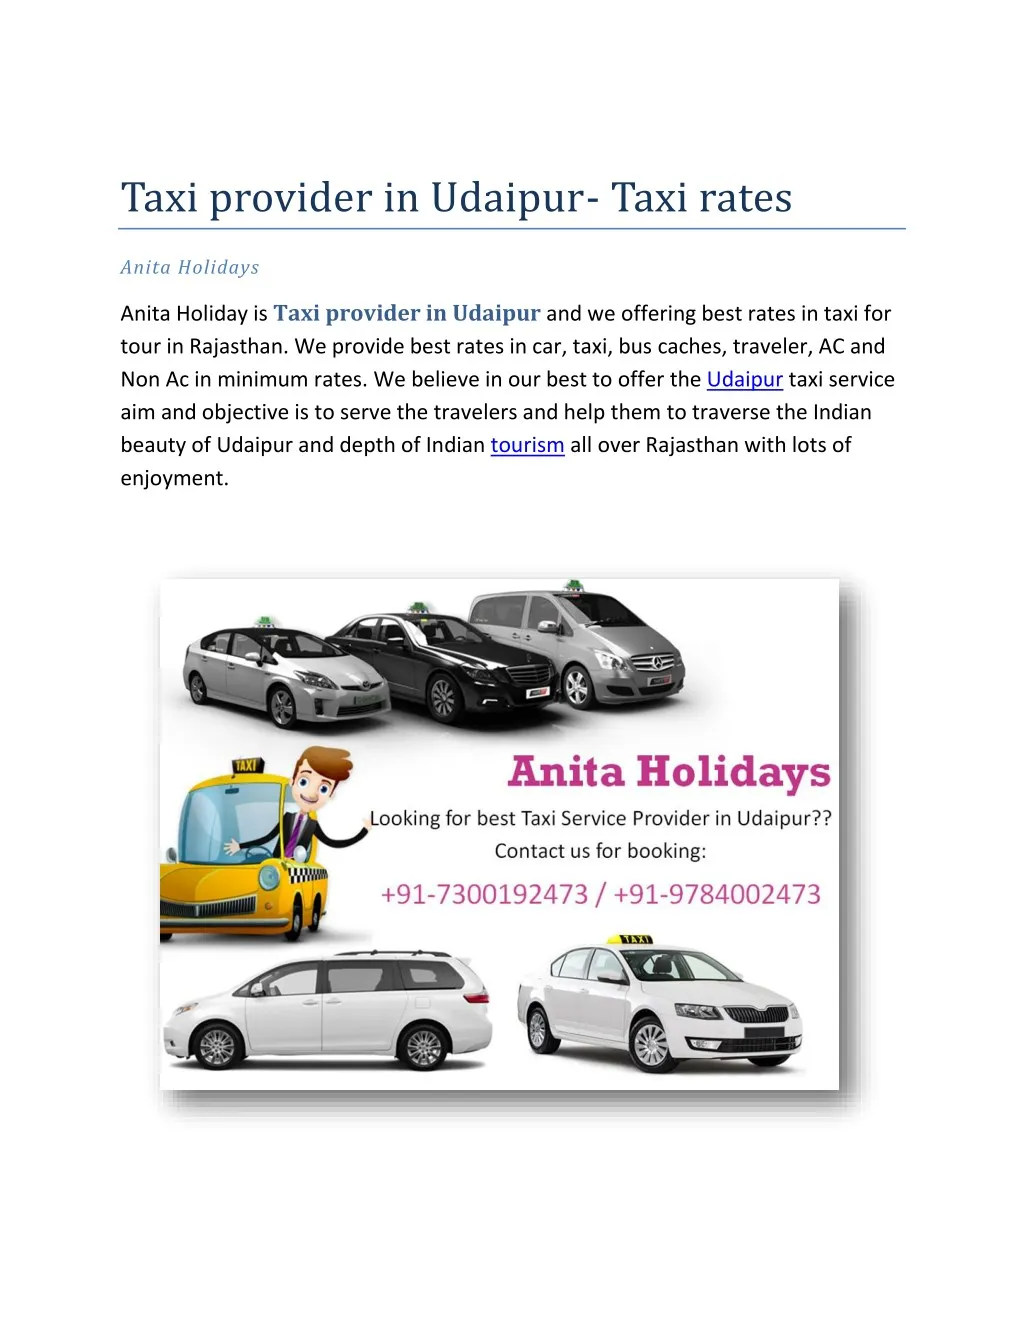 taxi provider in udaipur taxi rates